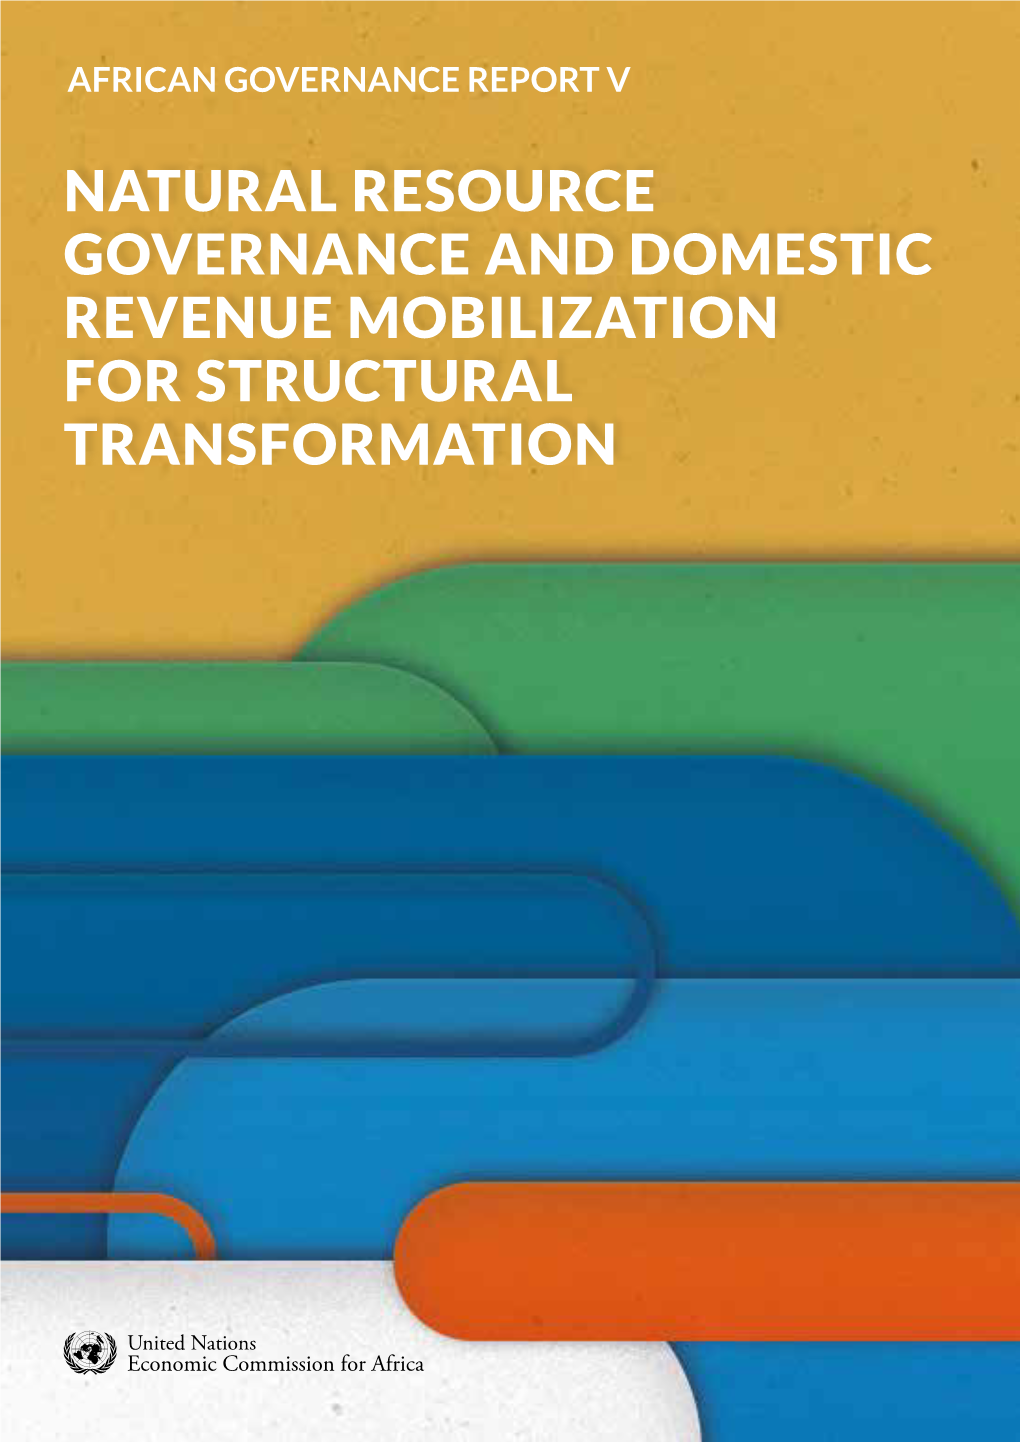 Natural Resource Governance and Domestic Revenue Mobilization for Structural Transformation